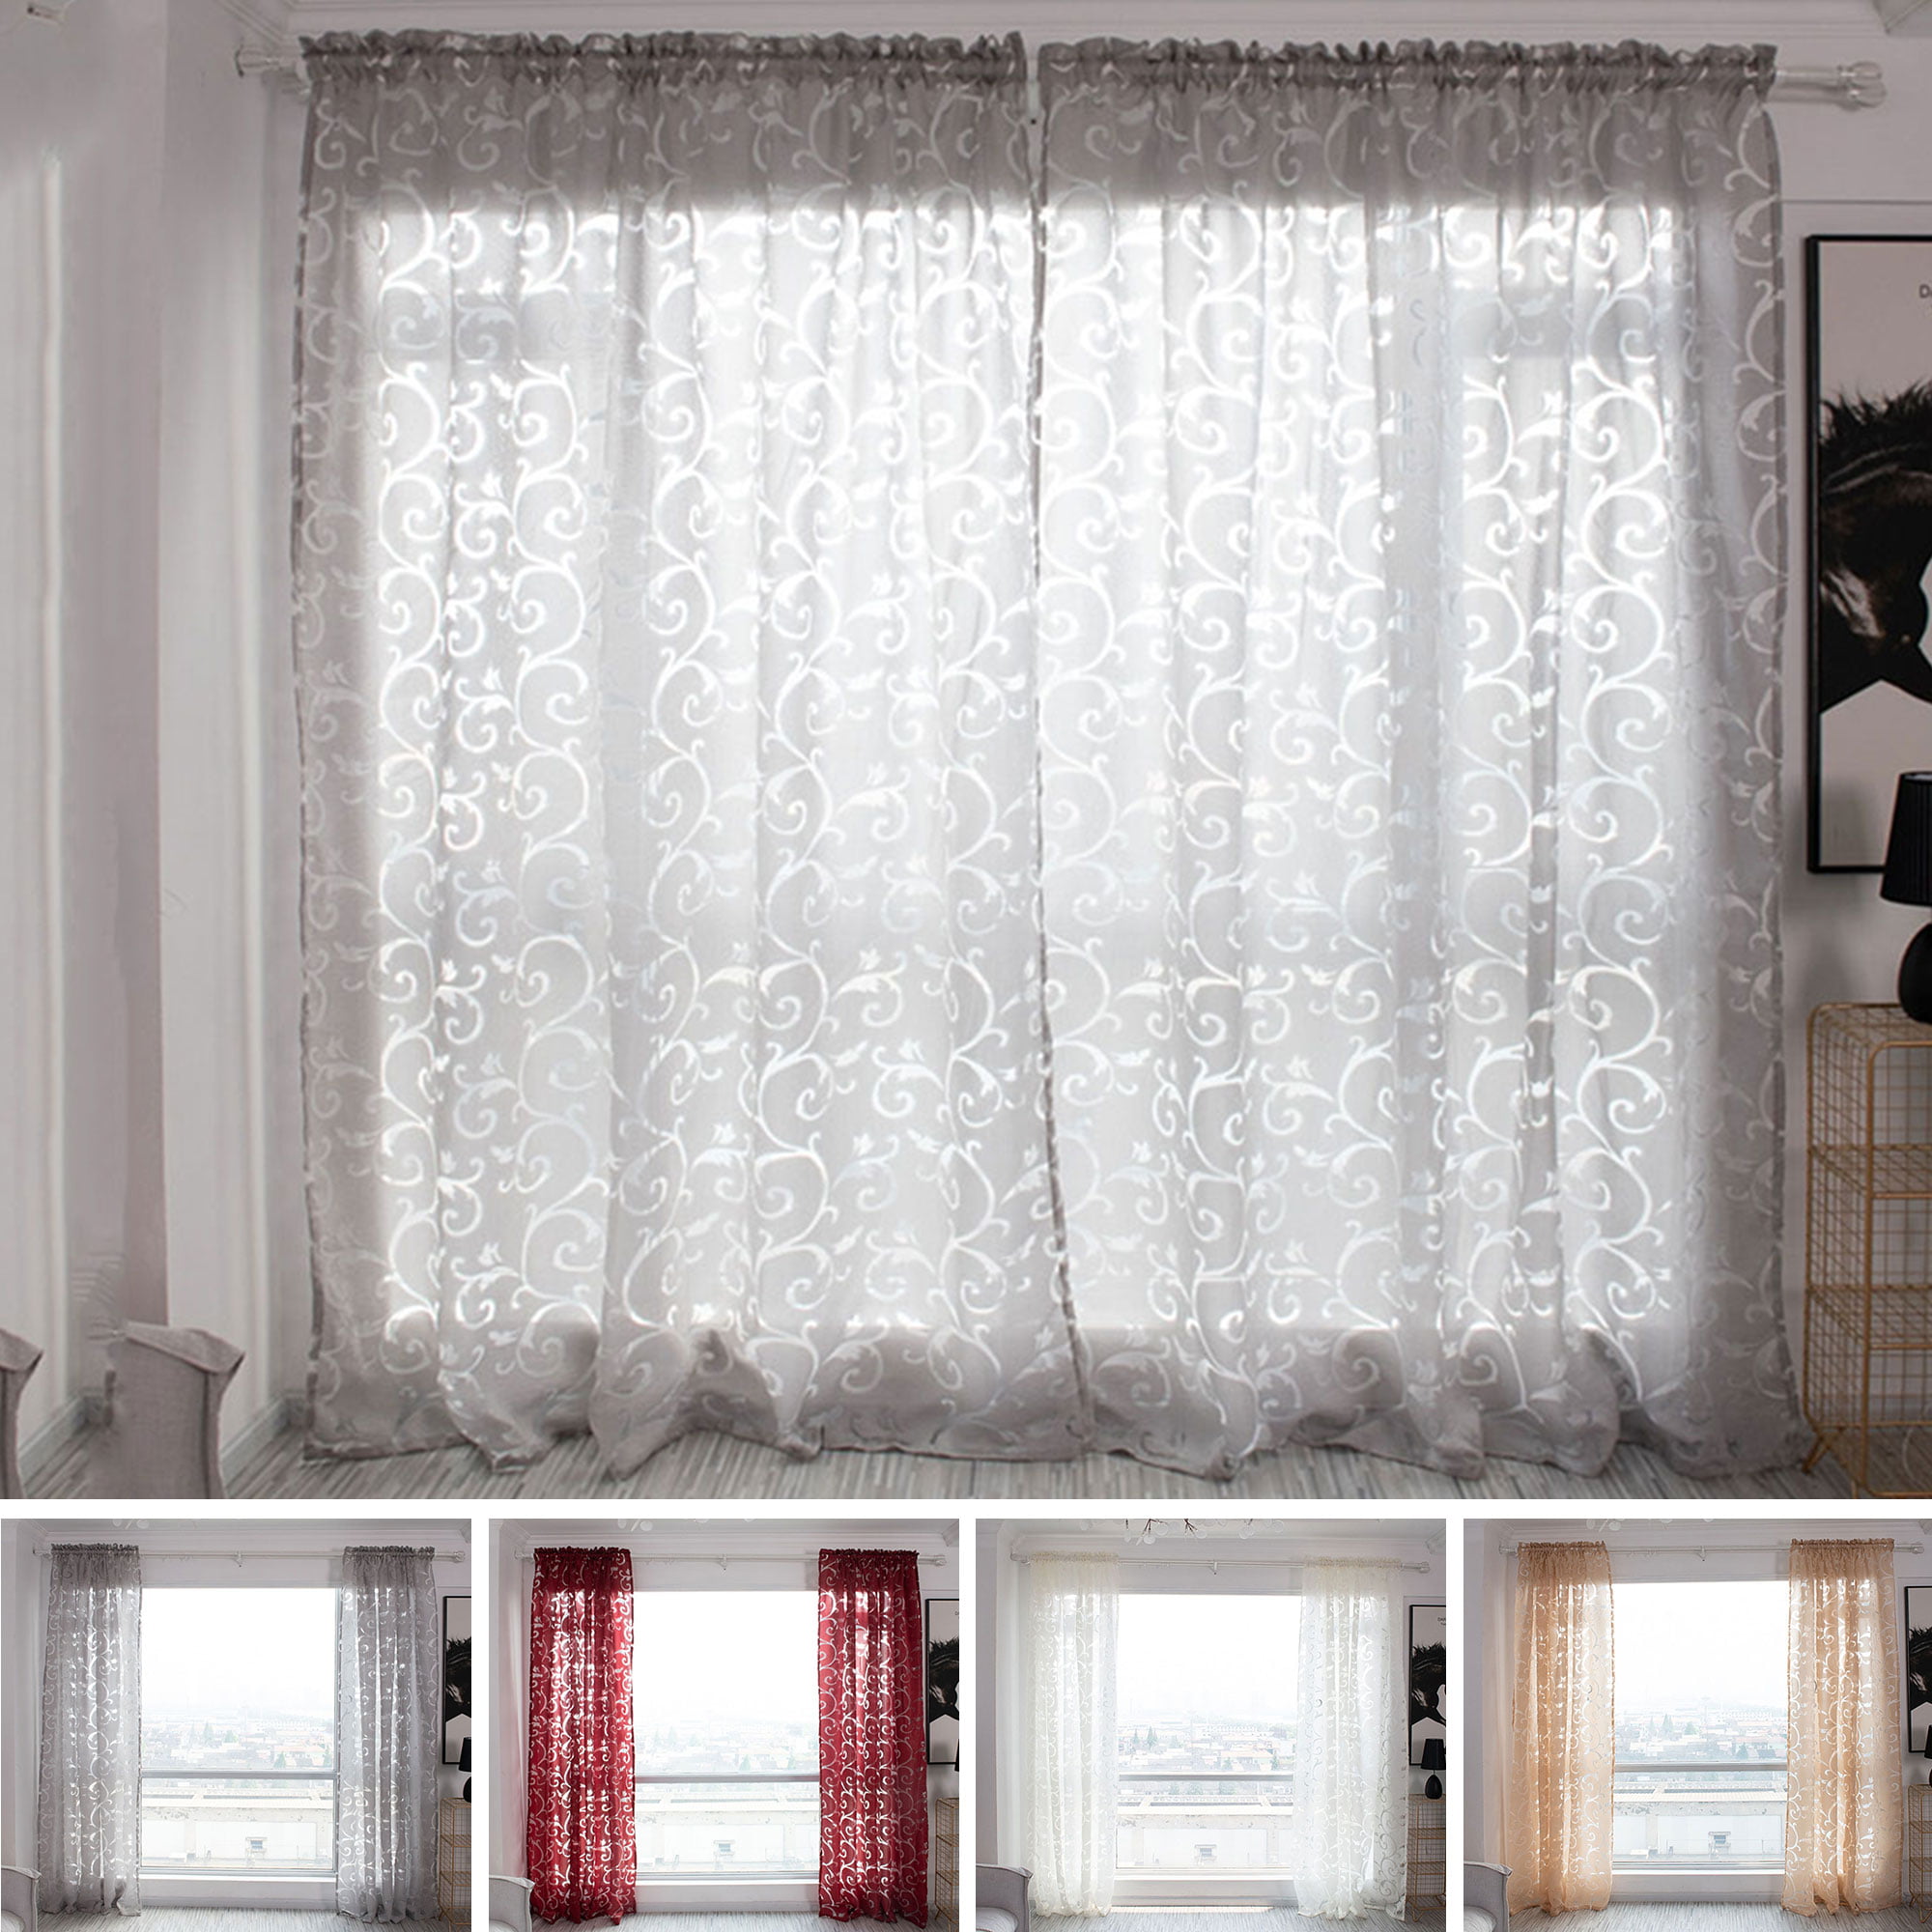 Curtains Panel Window Treatment For Living Room Bedroom Kitchen Modern Tulle New 